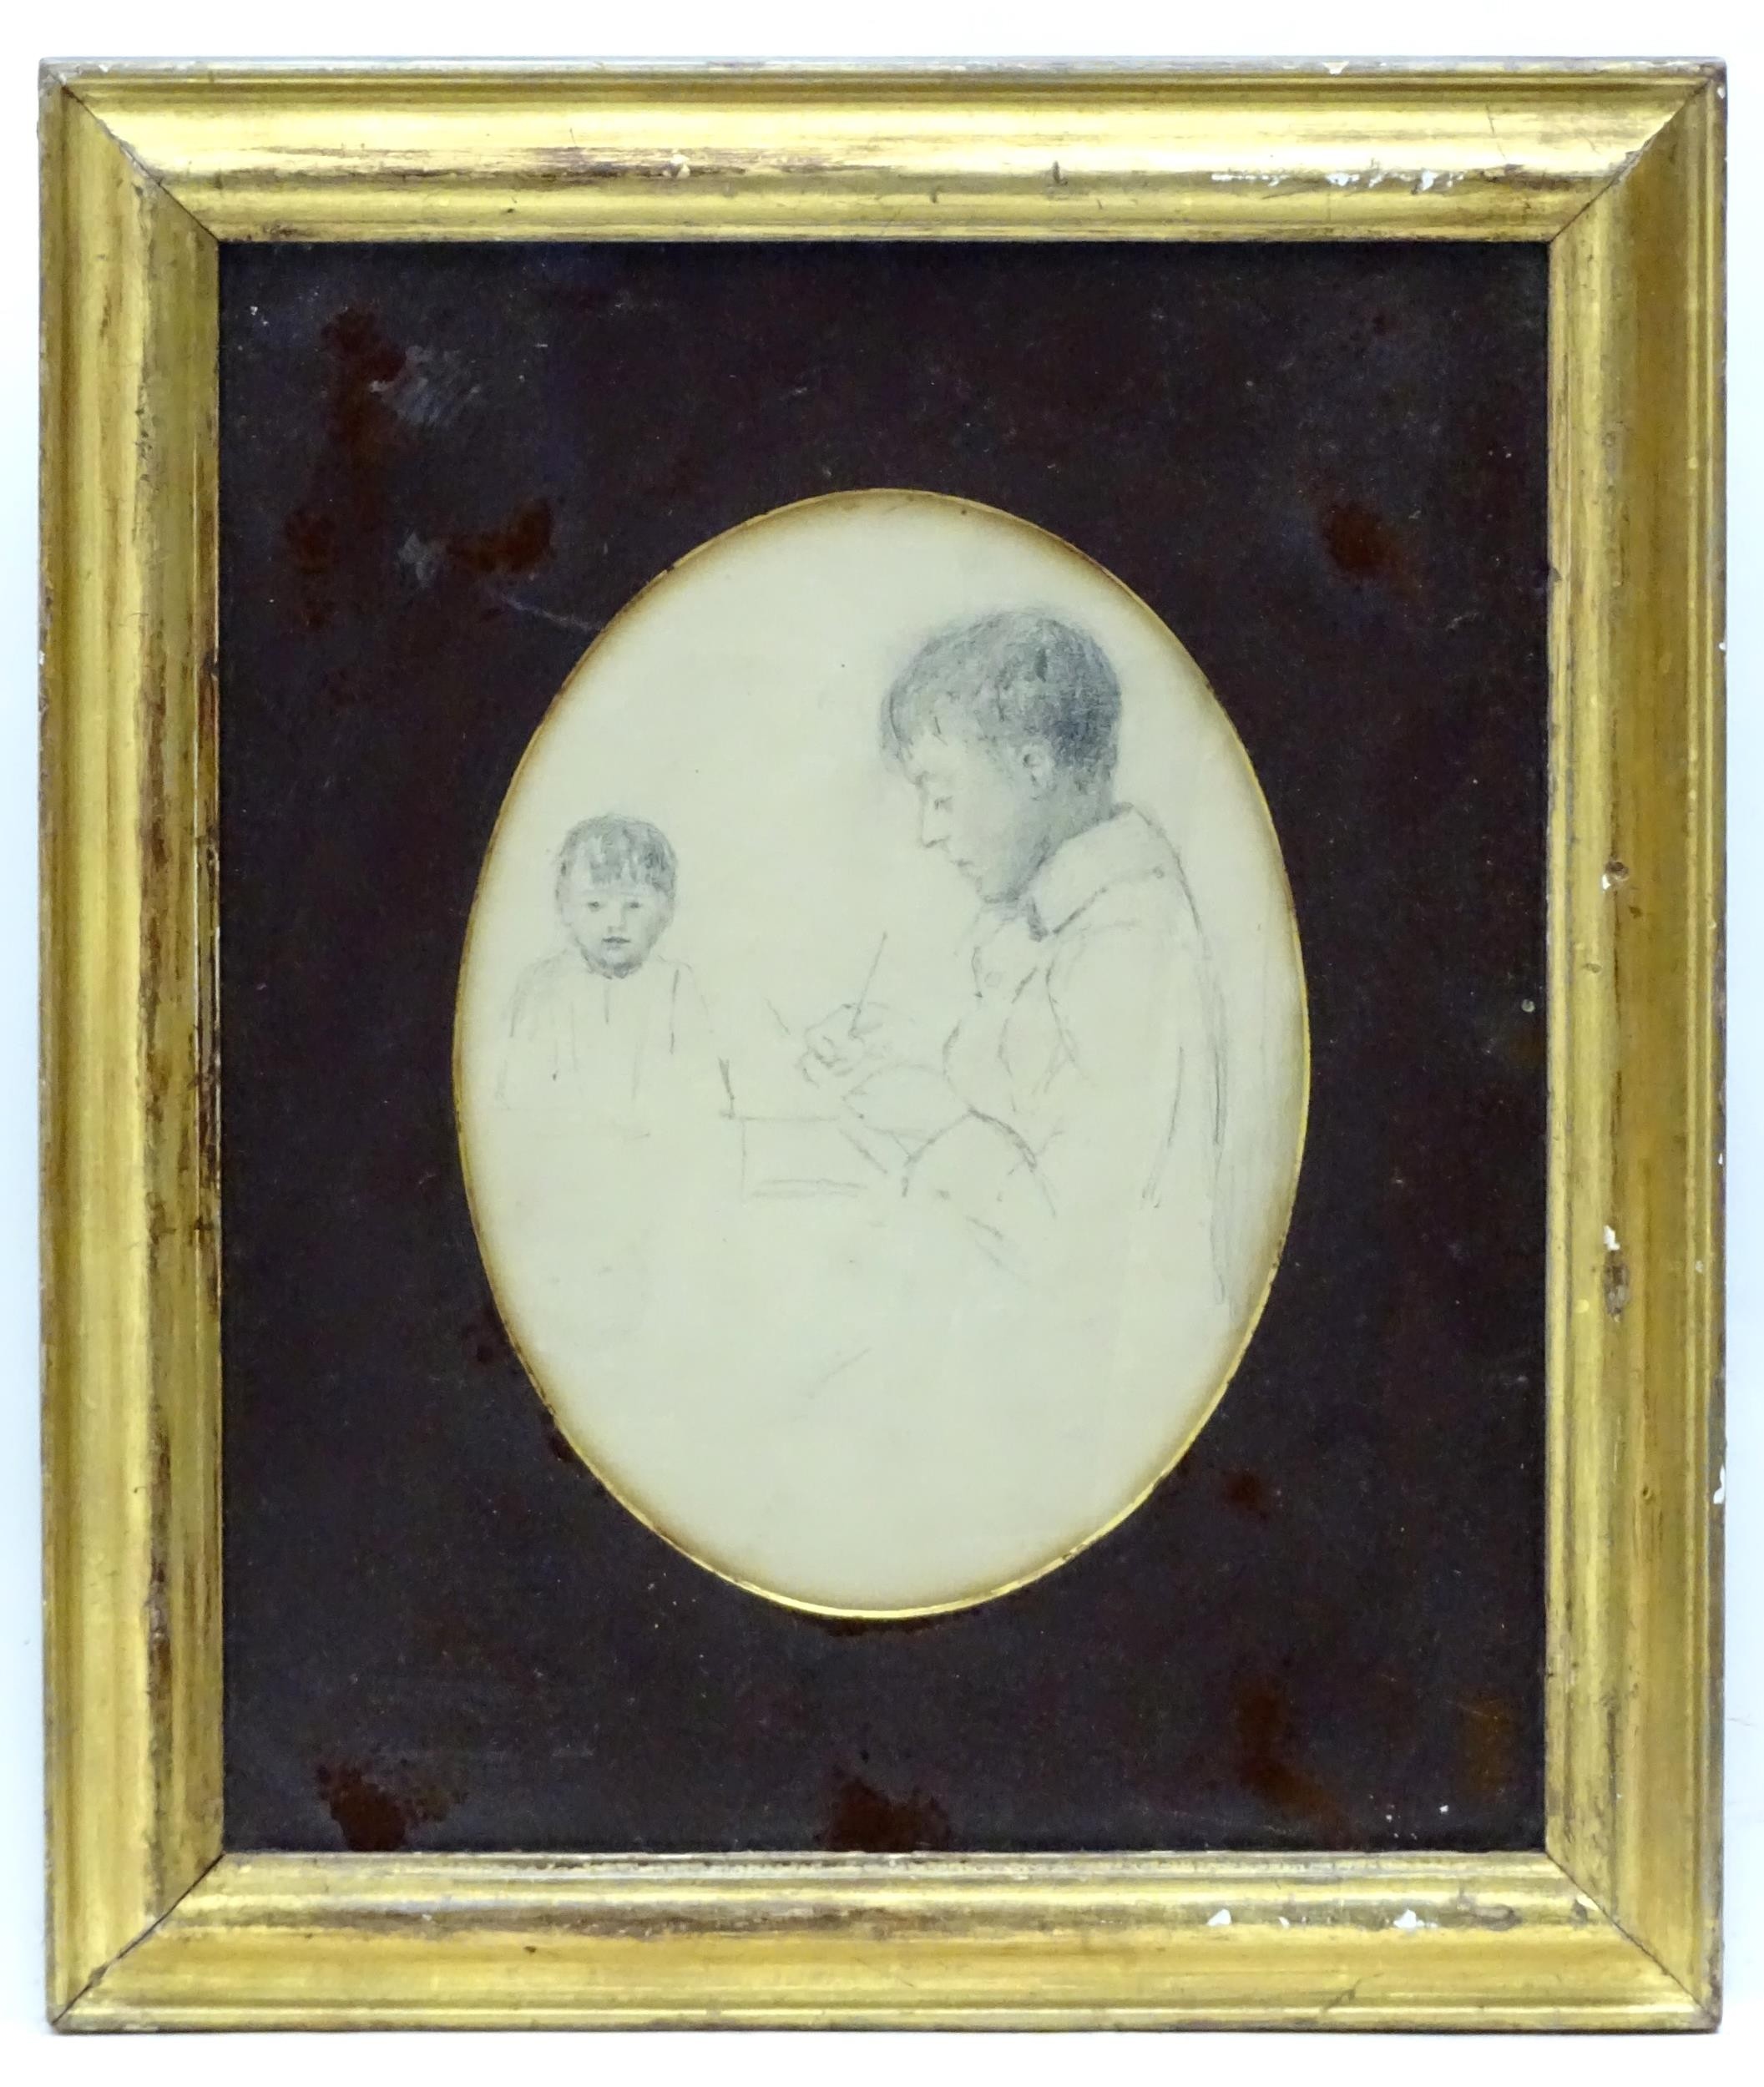 Early 20th century, English School, Pencil, A study of a man writing and a portrait of a young